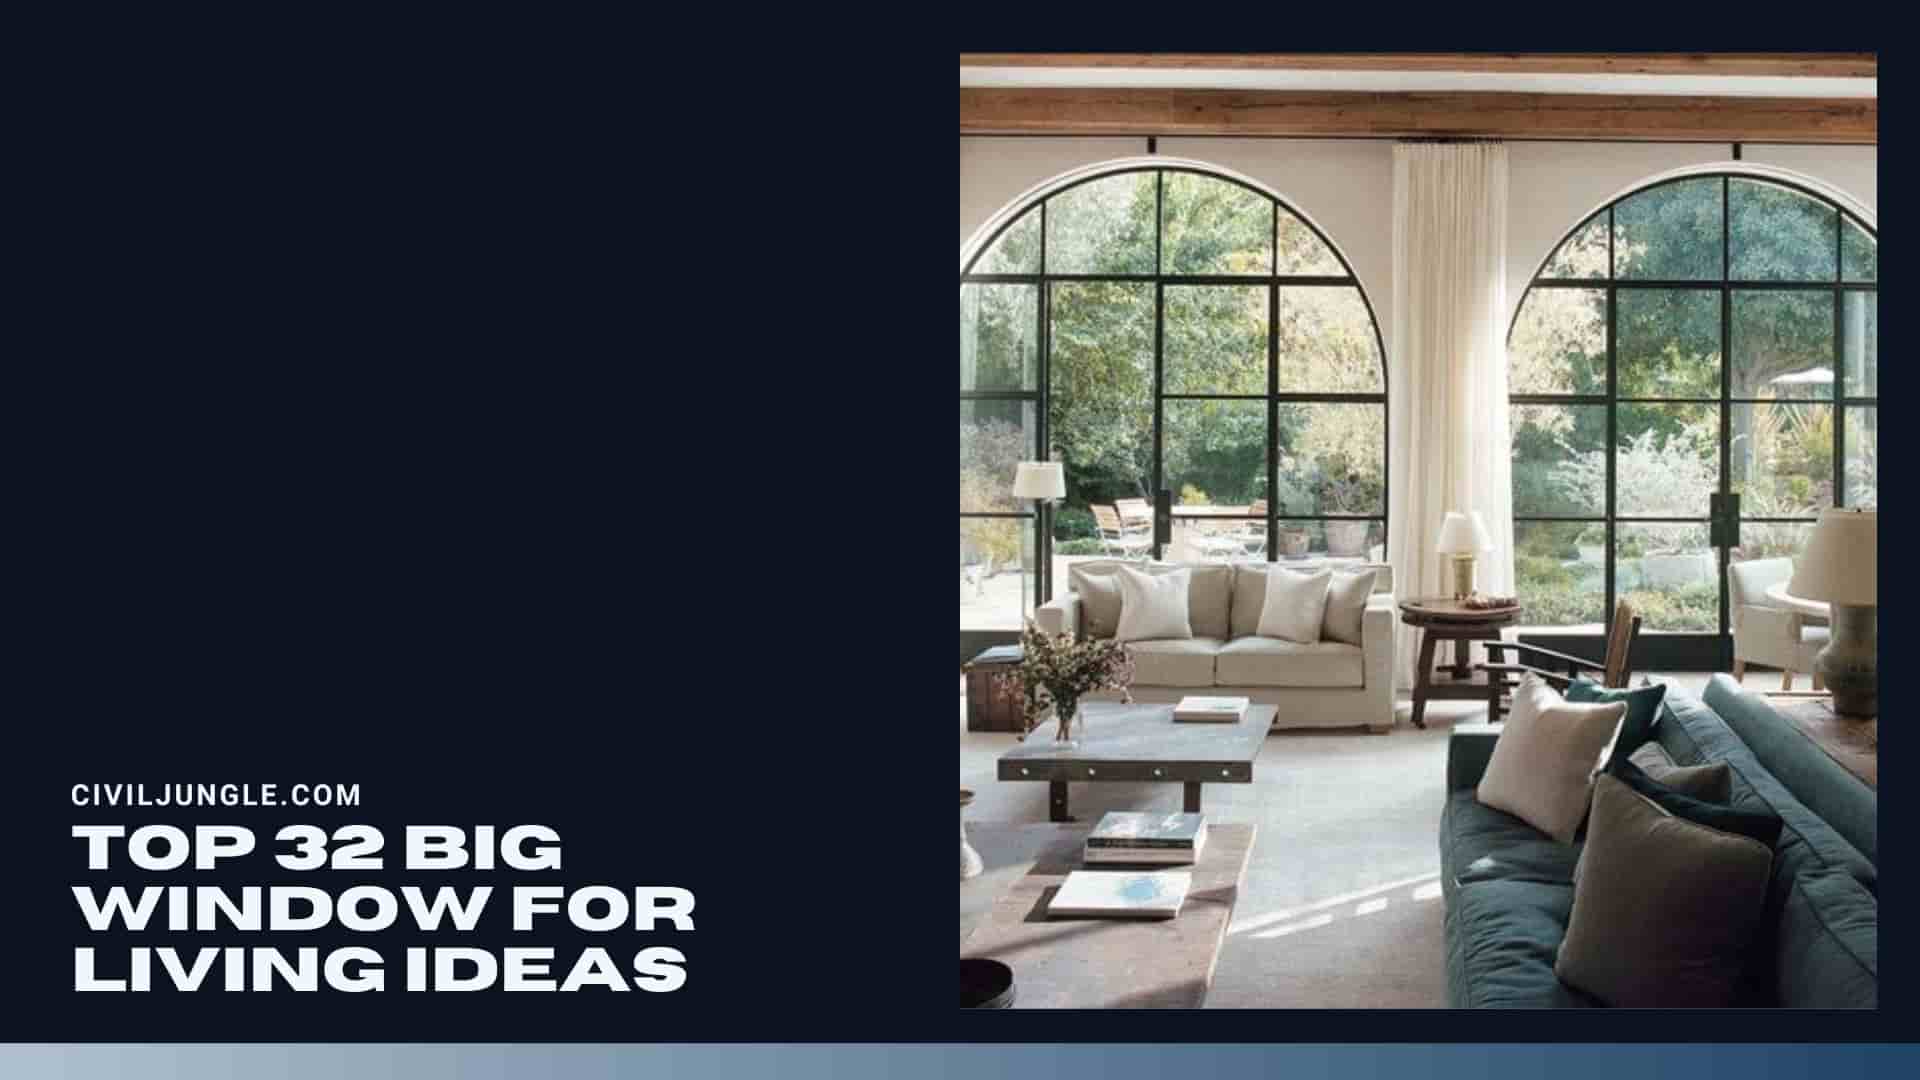 Top 32 Big Window for Living Ideas